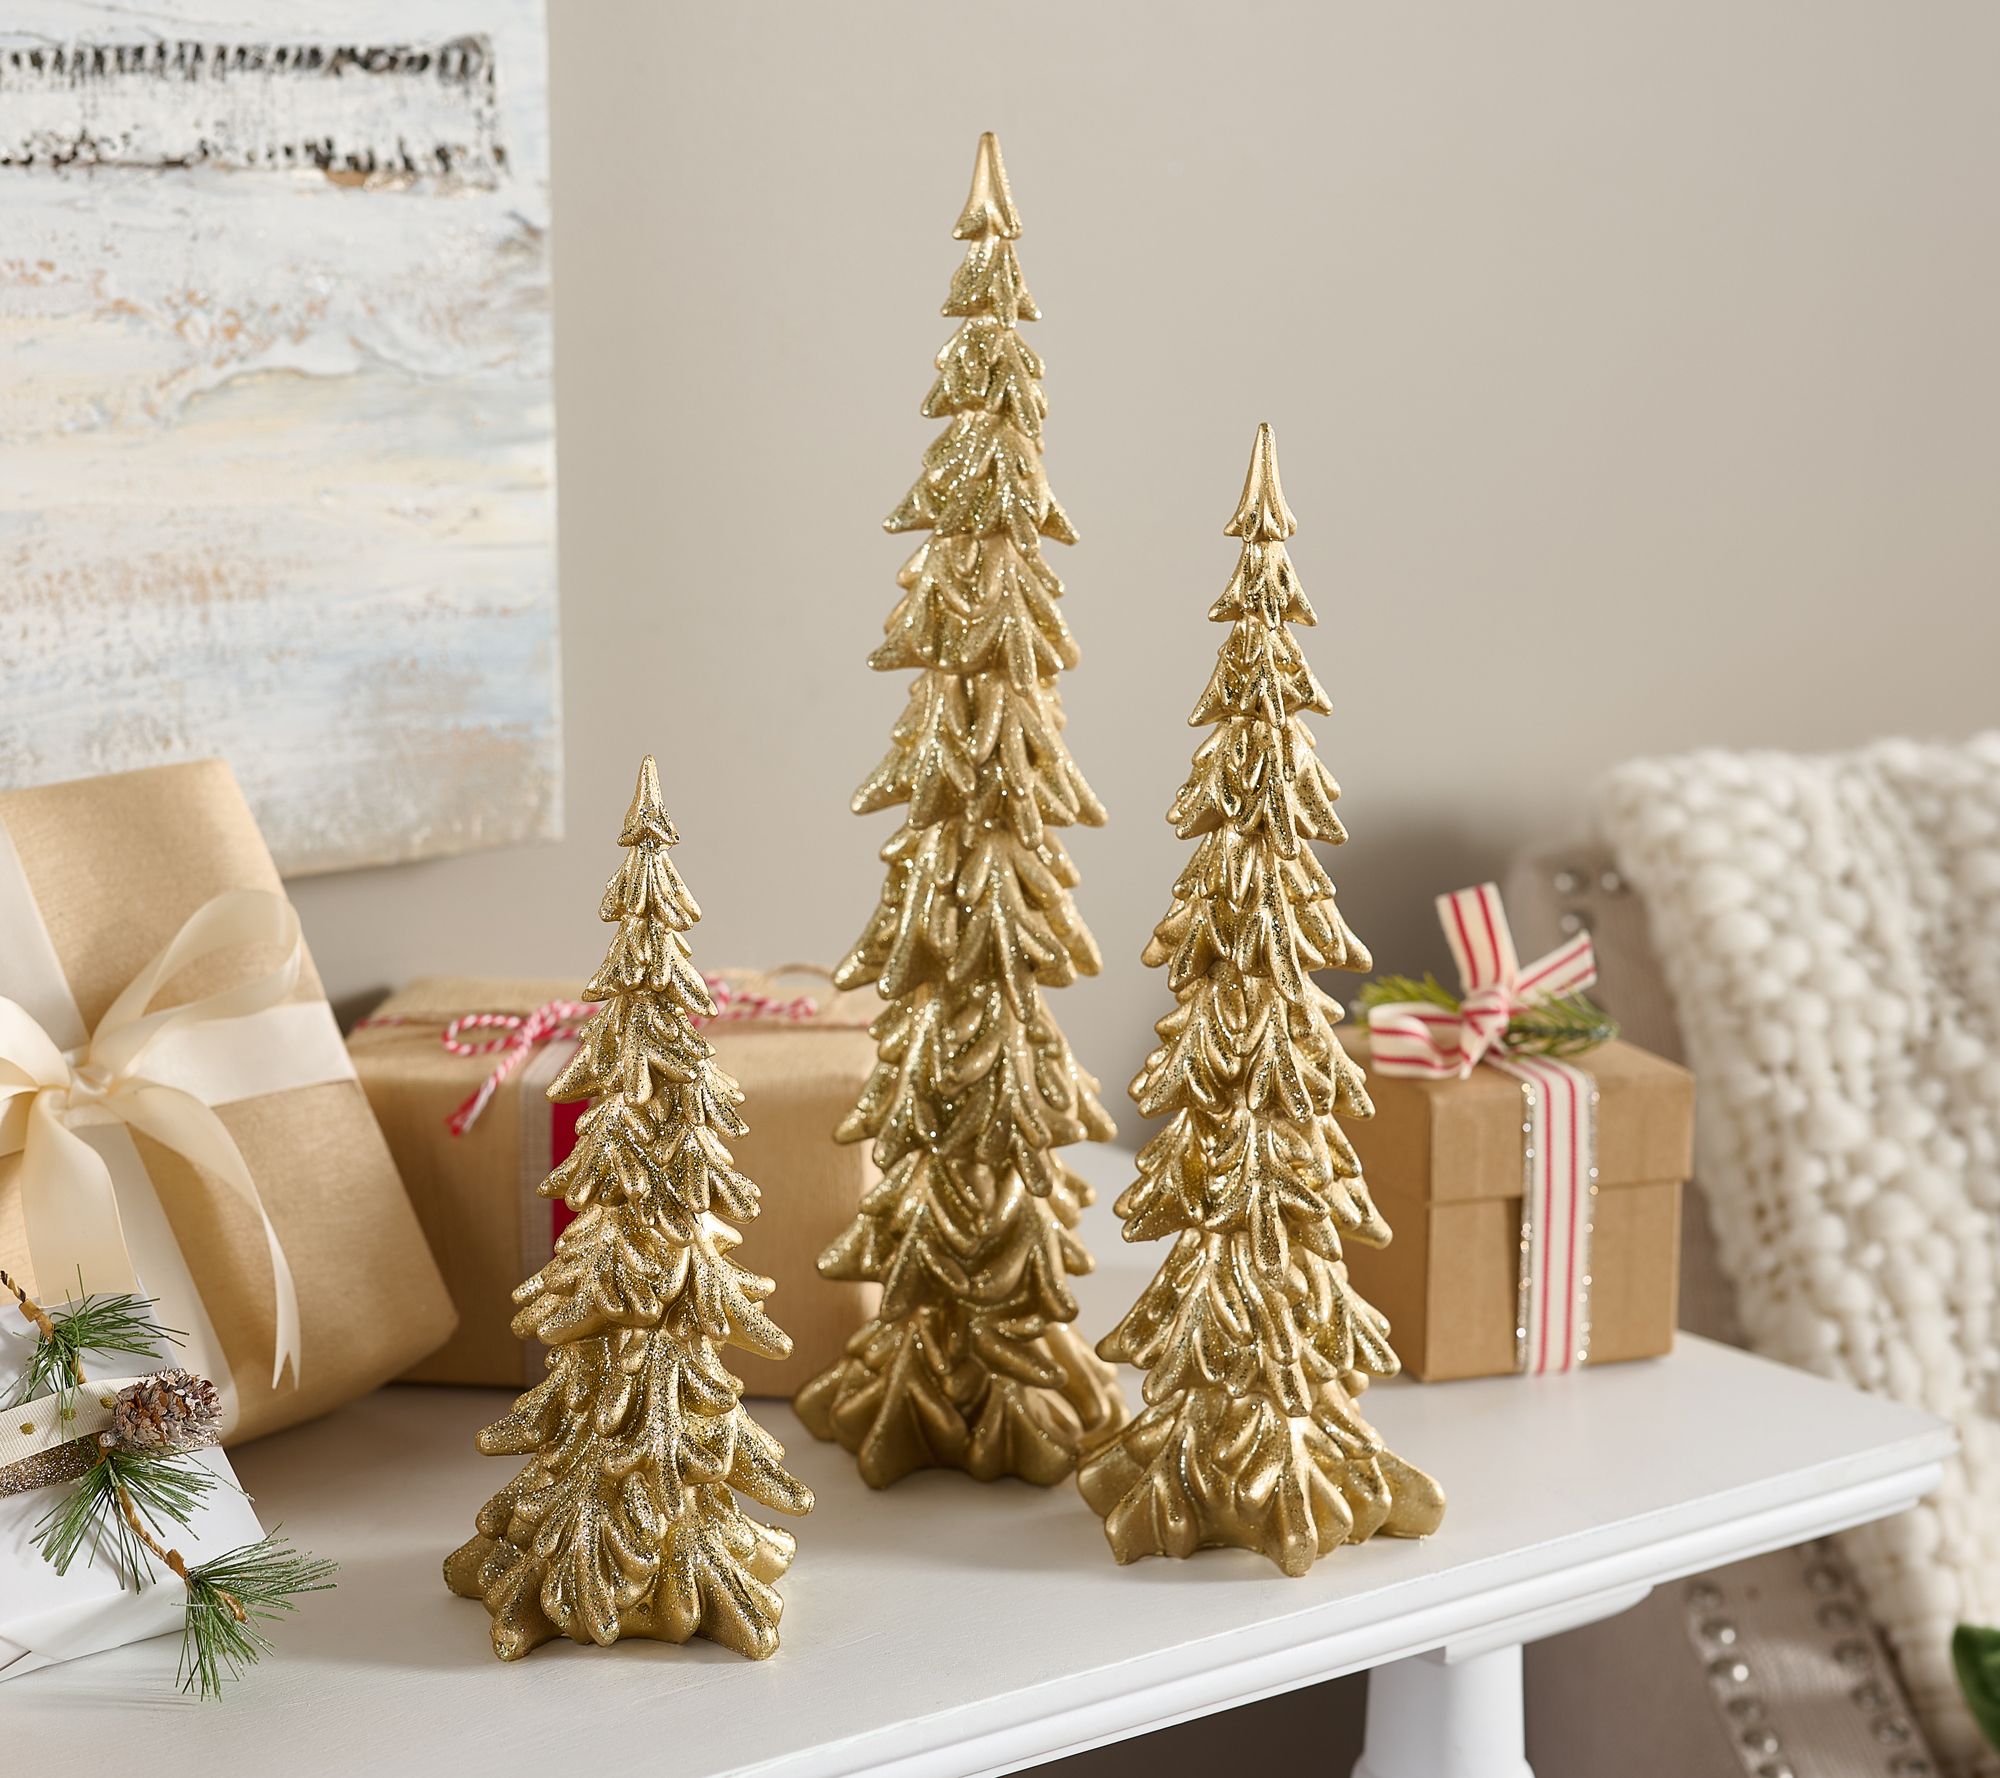 Simply Stunning Set of 3 Glitter Downswept Trees by Janine Graff